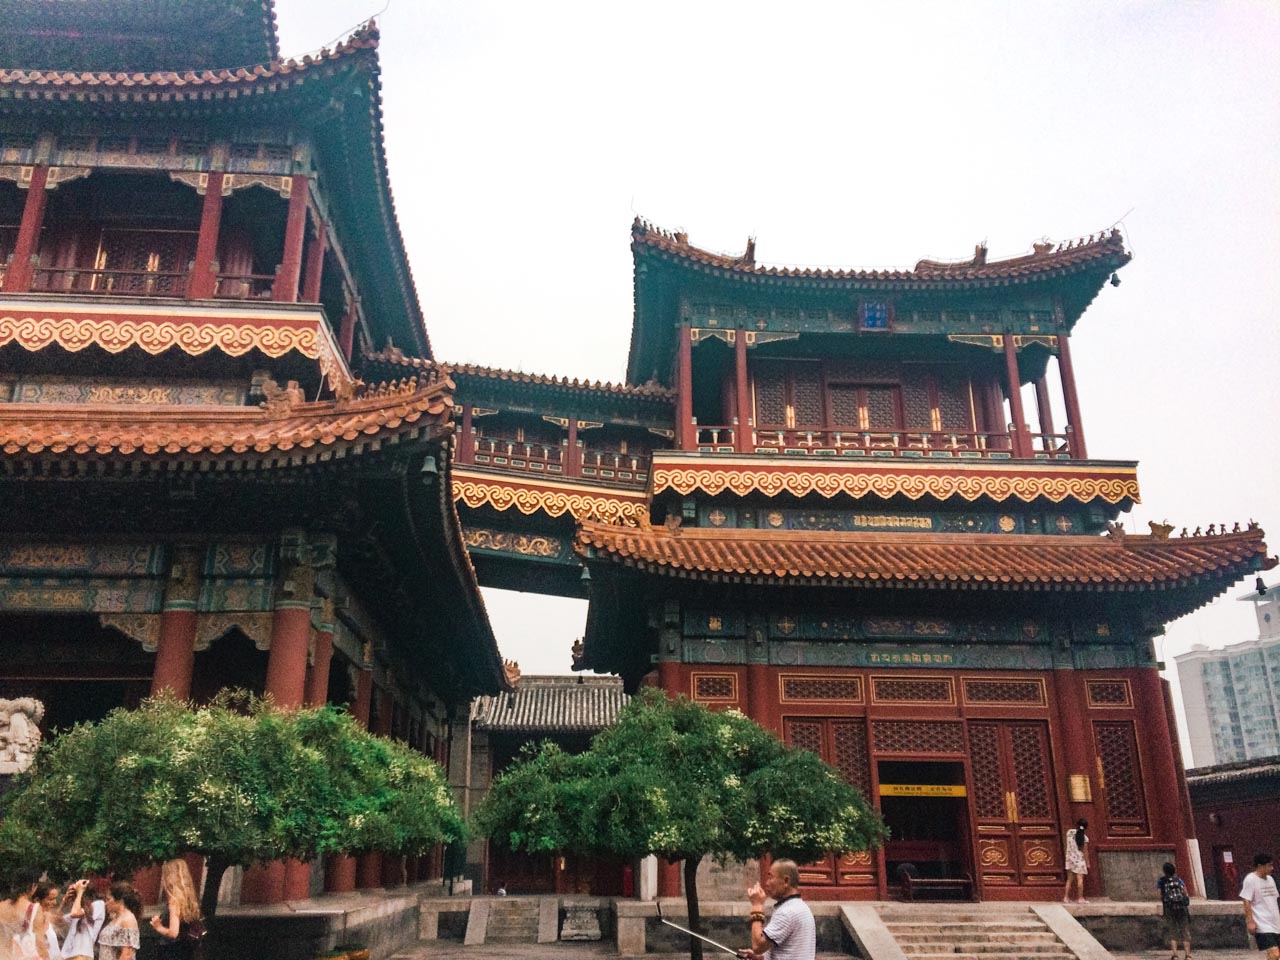 Traditional Chinese pagodas at the Yonghegong Lama Temple in Beijing, China